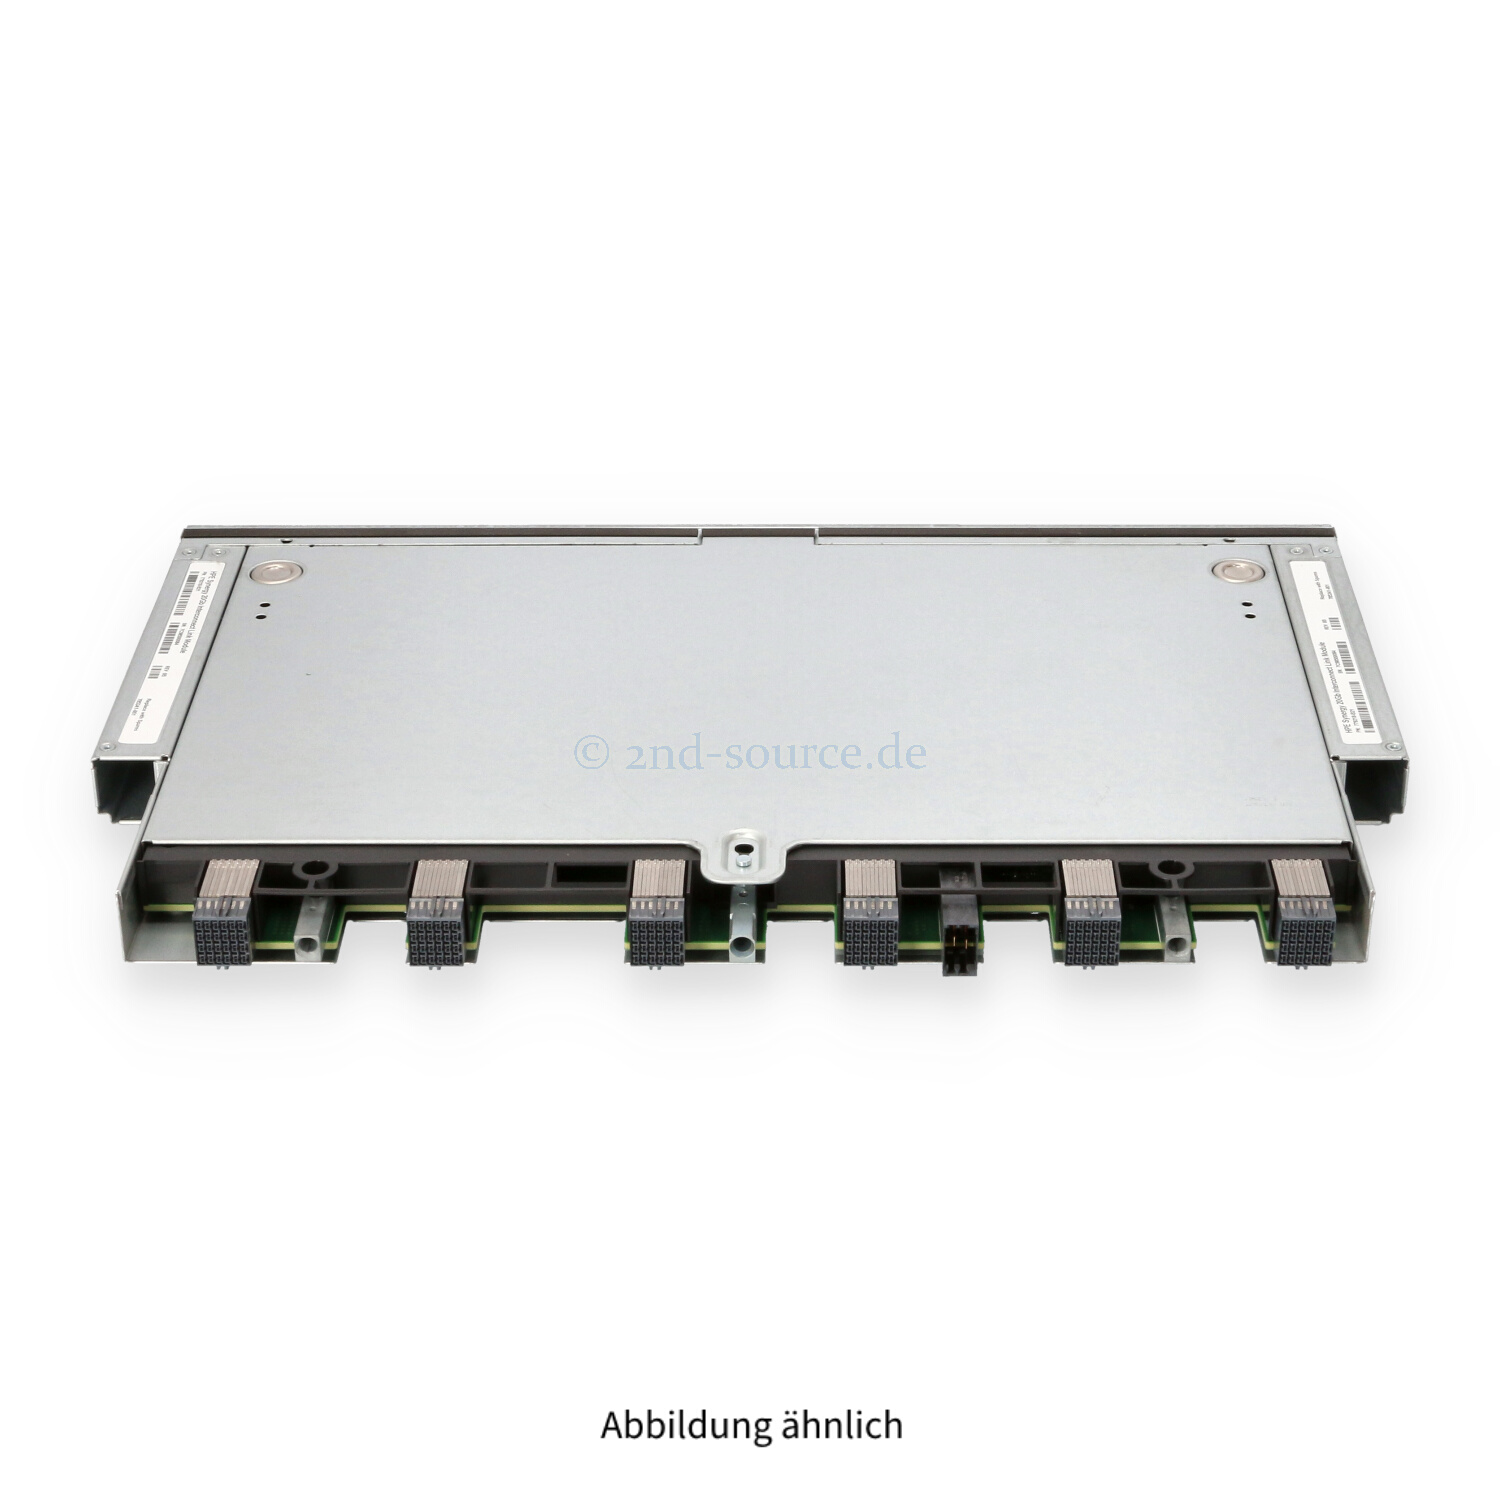 HPE Synergy 20G Interconnect Link Module 779218-B21 785341-001